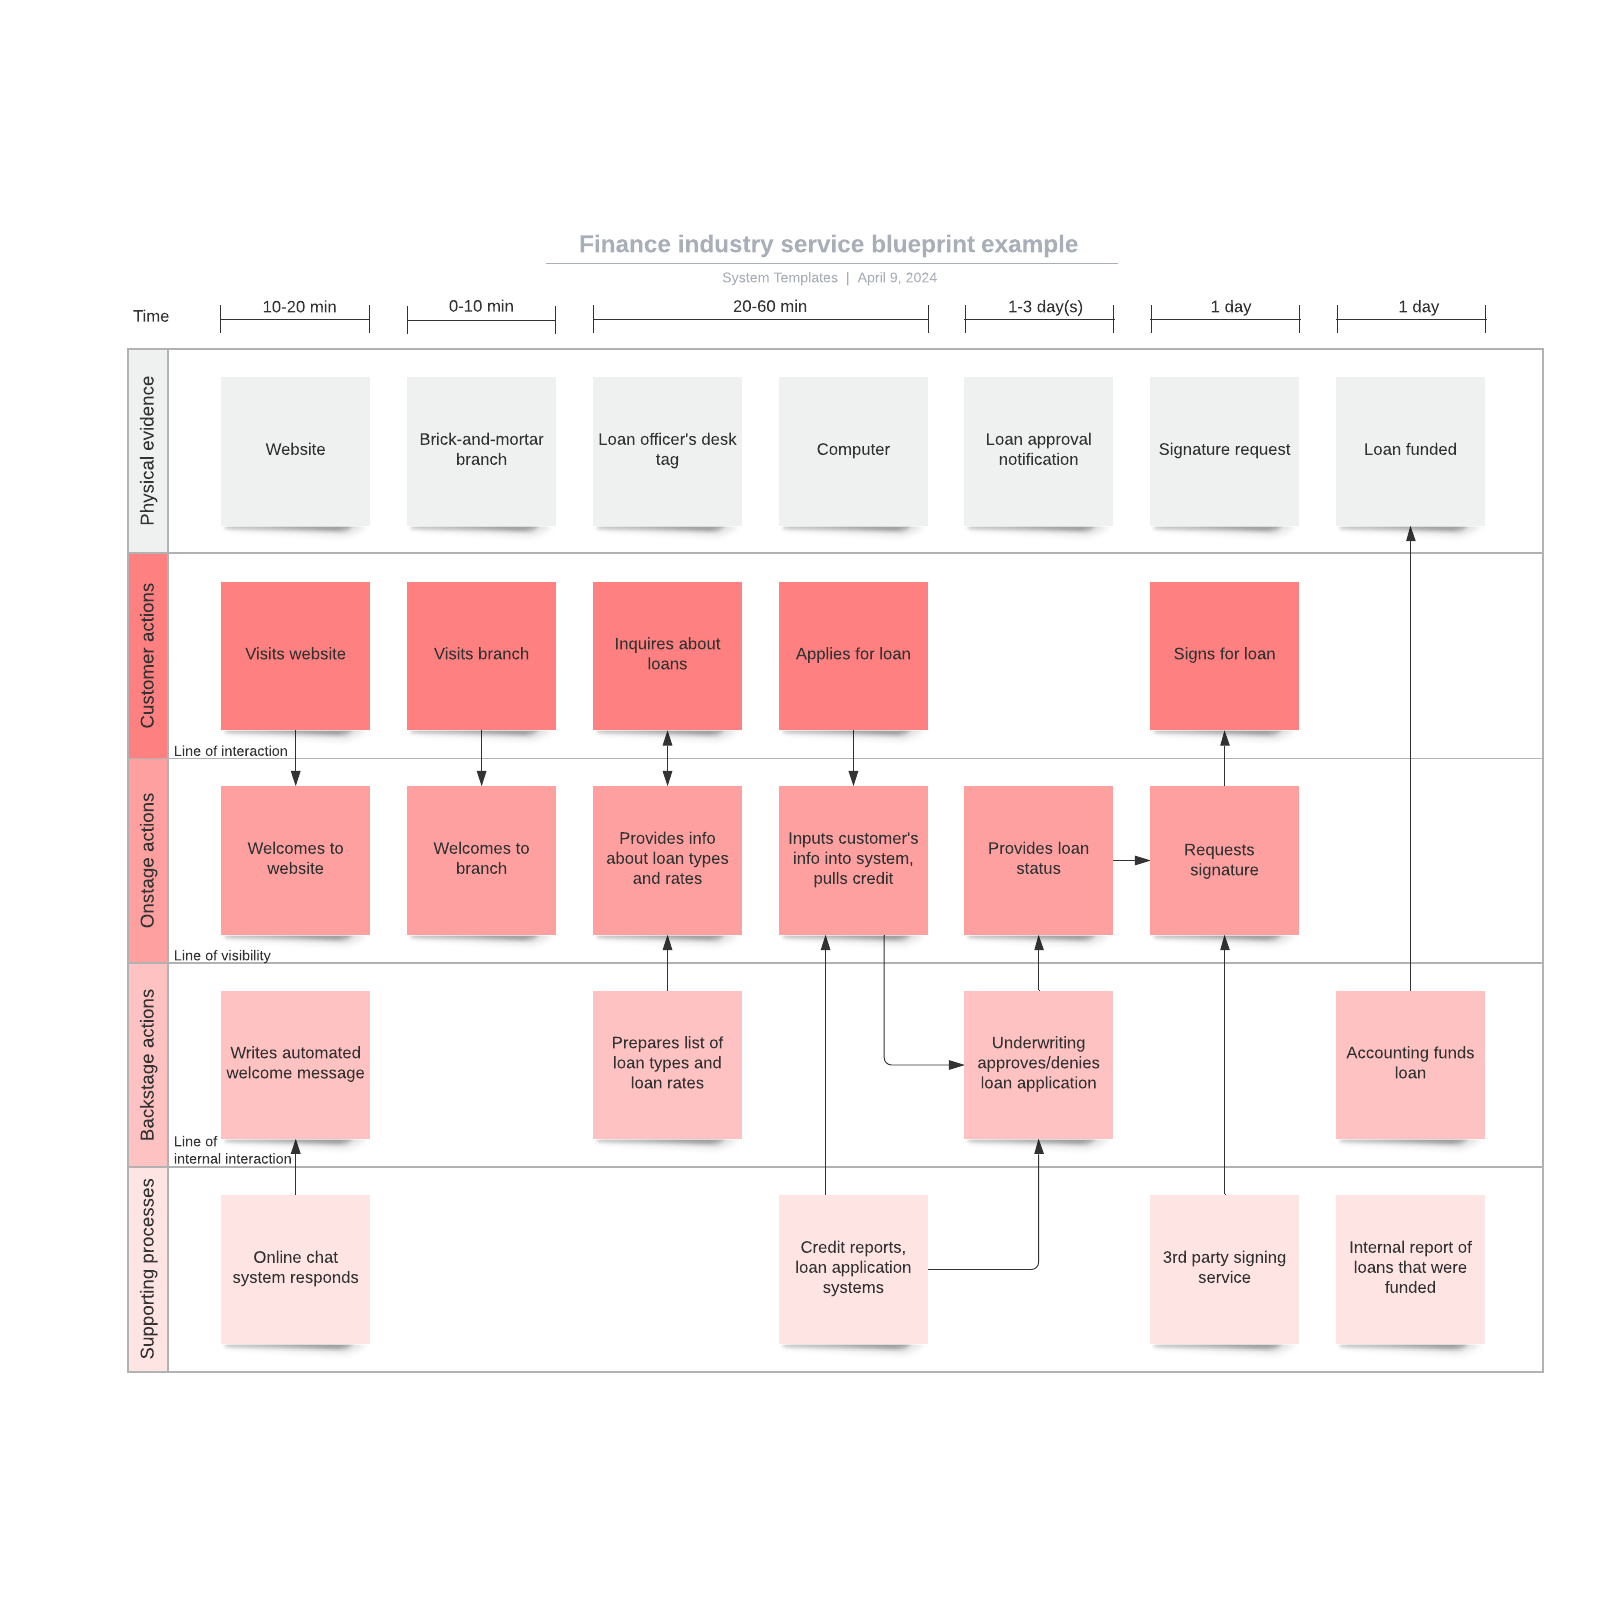 Finance industry service blueprint example example